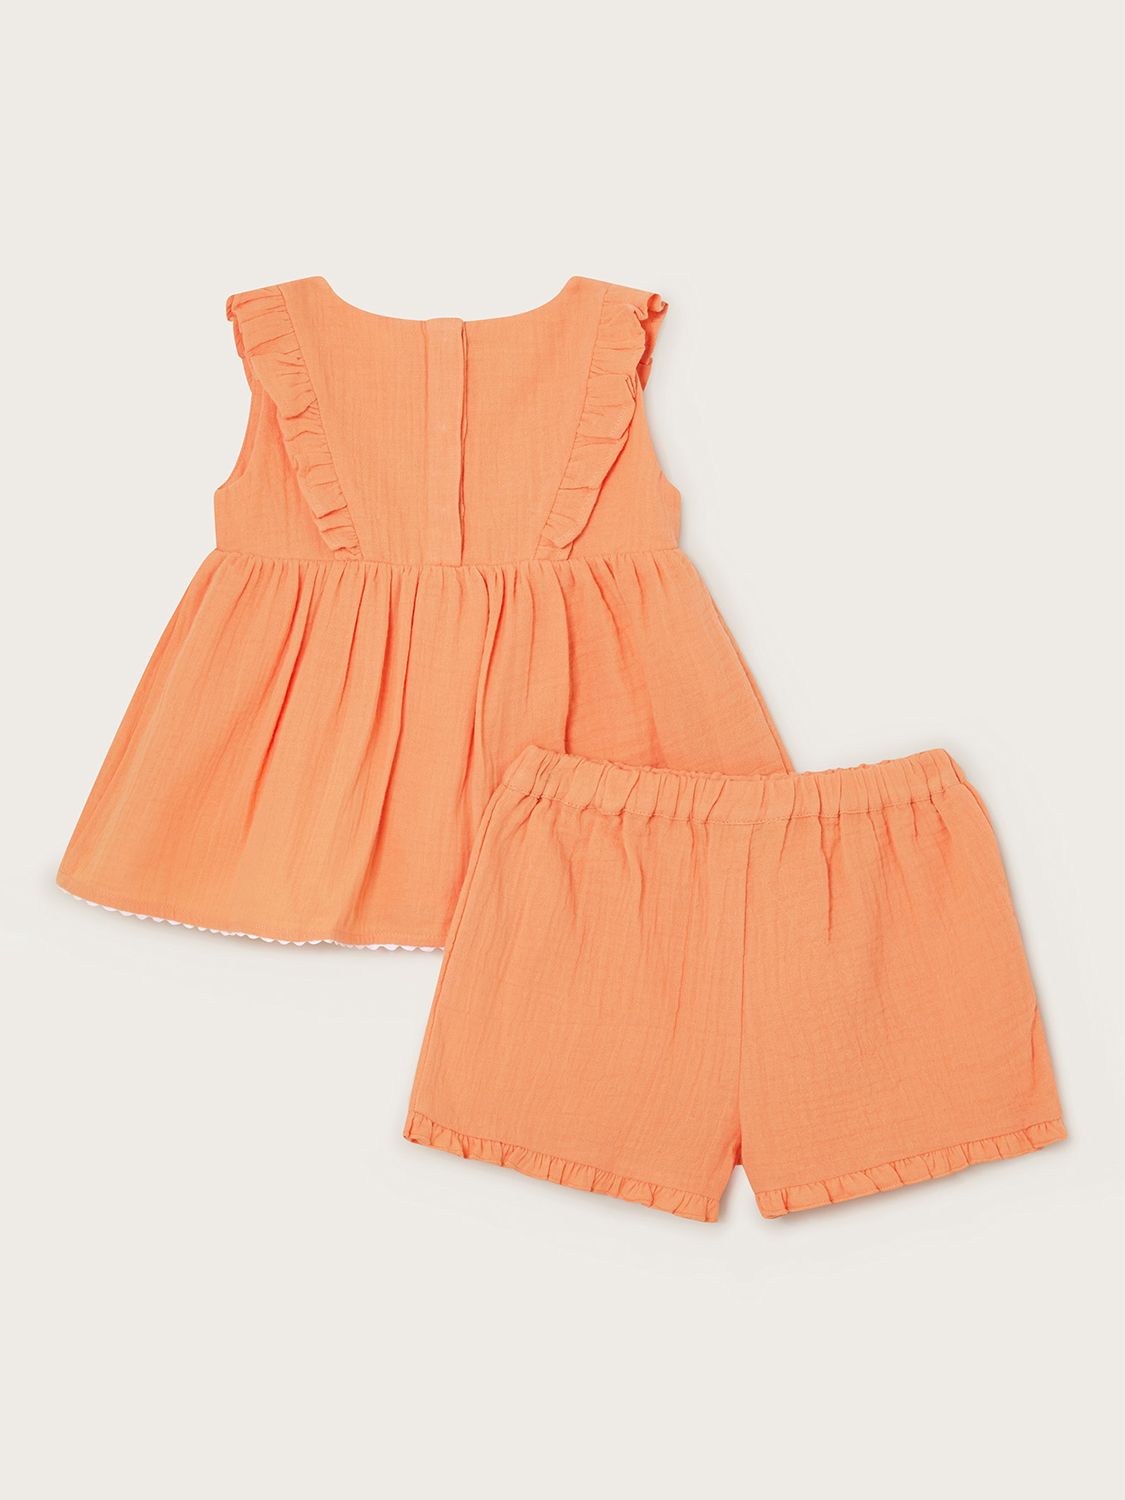 Monsoon Baby Sealife Embroidered Frill Top & Shorts Set, Coral, 3-6 months